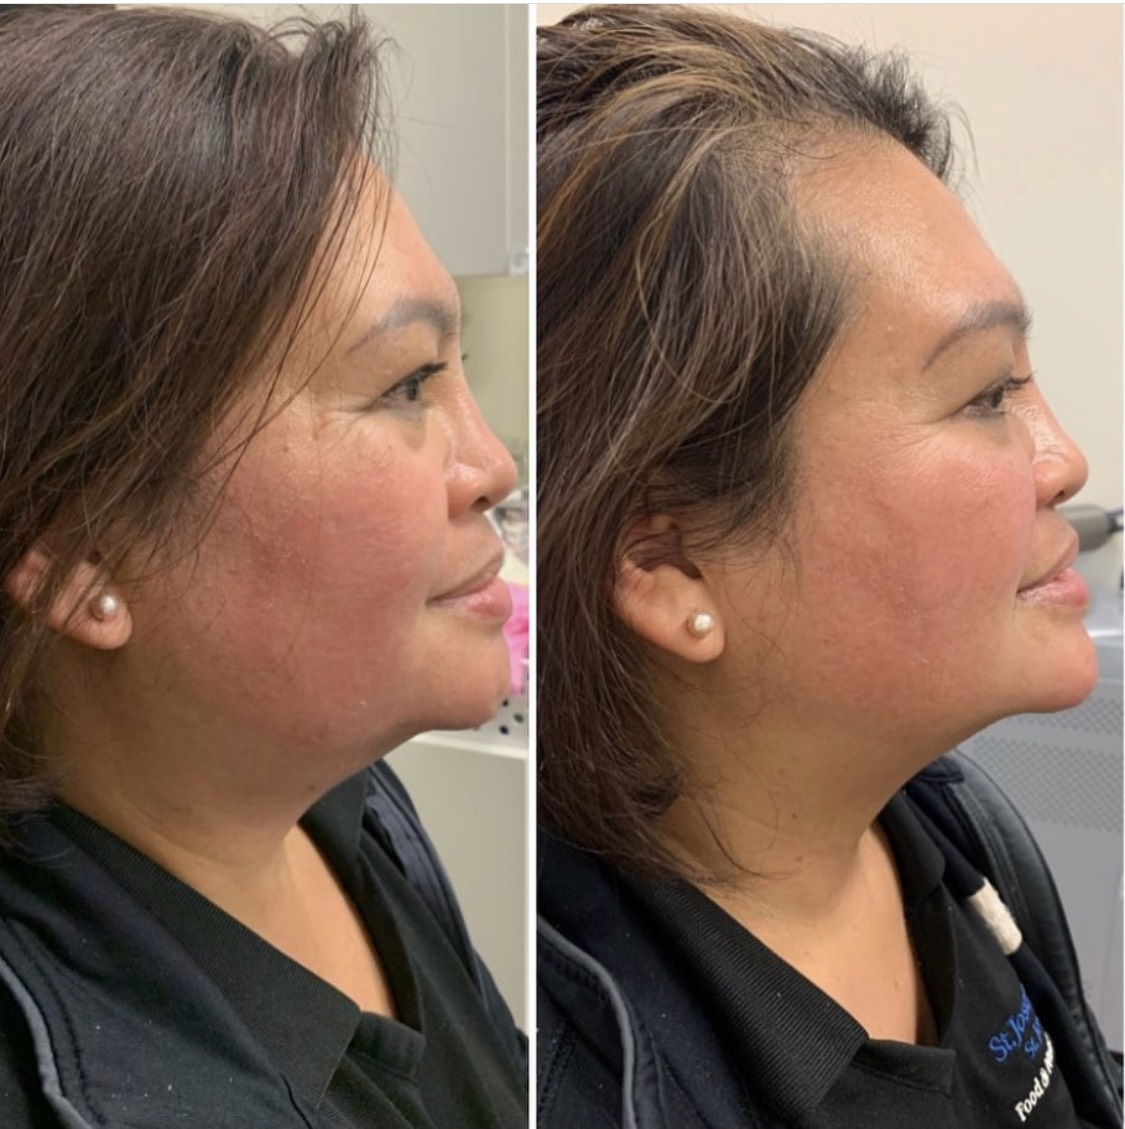 Chin filler to improve chin projection and jawline definition, with Restylane Defyne one syringe